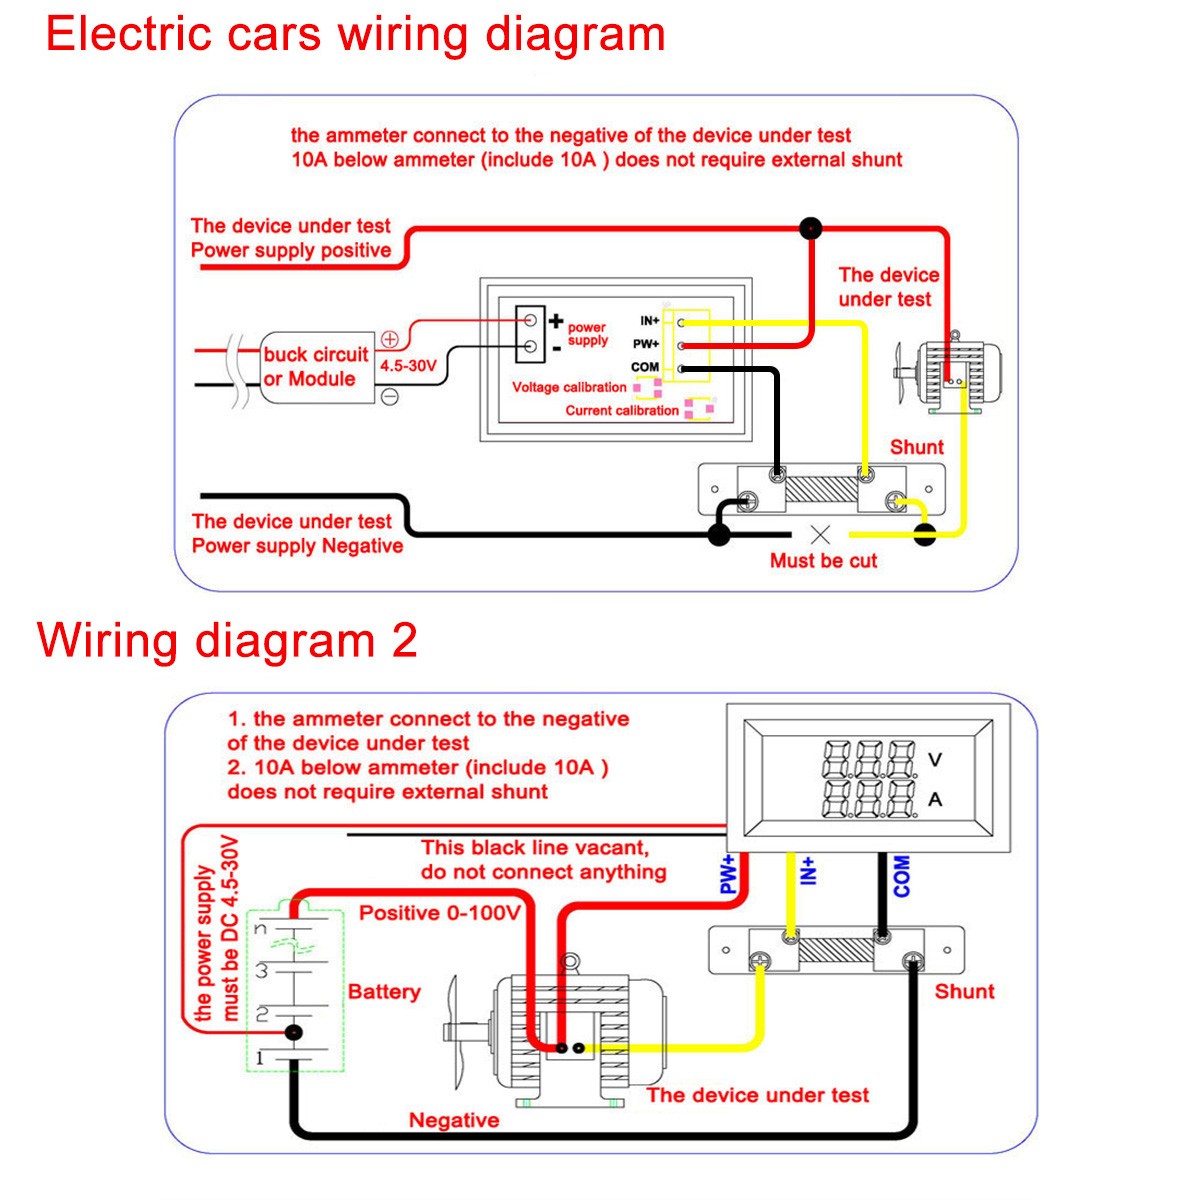 awesome digital and meter wiring diagram teamninjaz me dc motor wiring diagram dc motor wiring diagram with simple voltmeter diagram